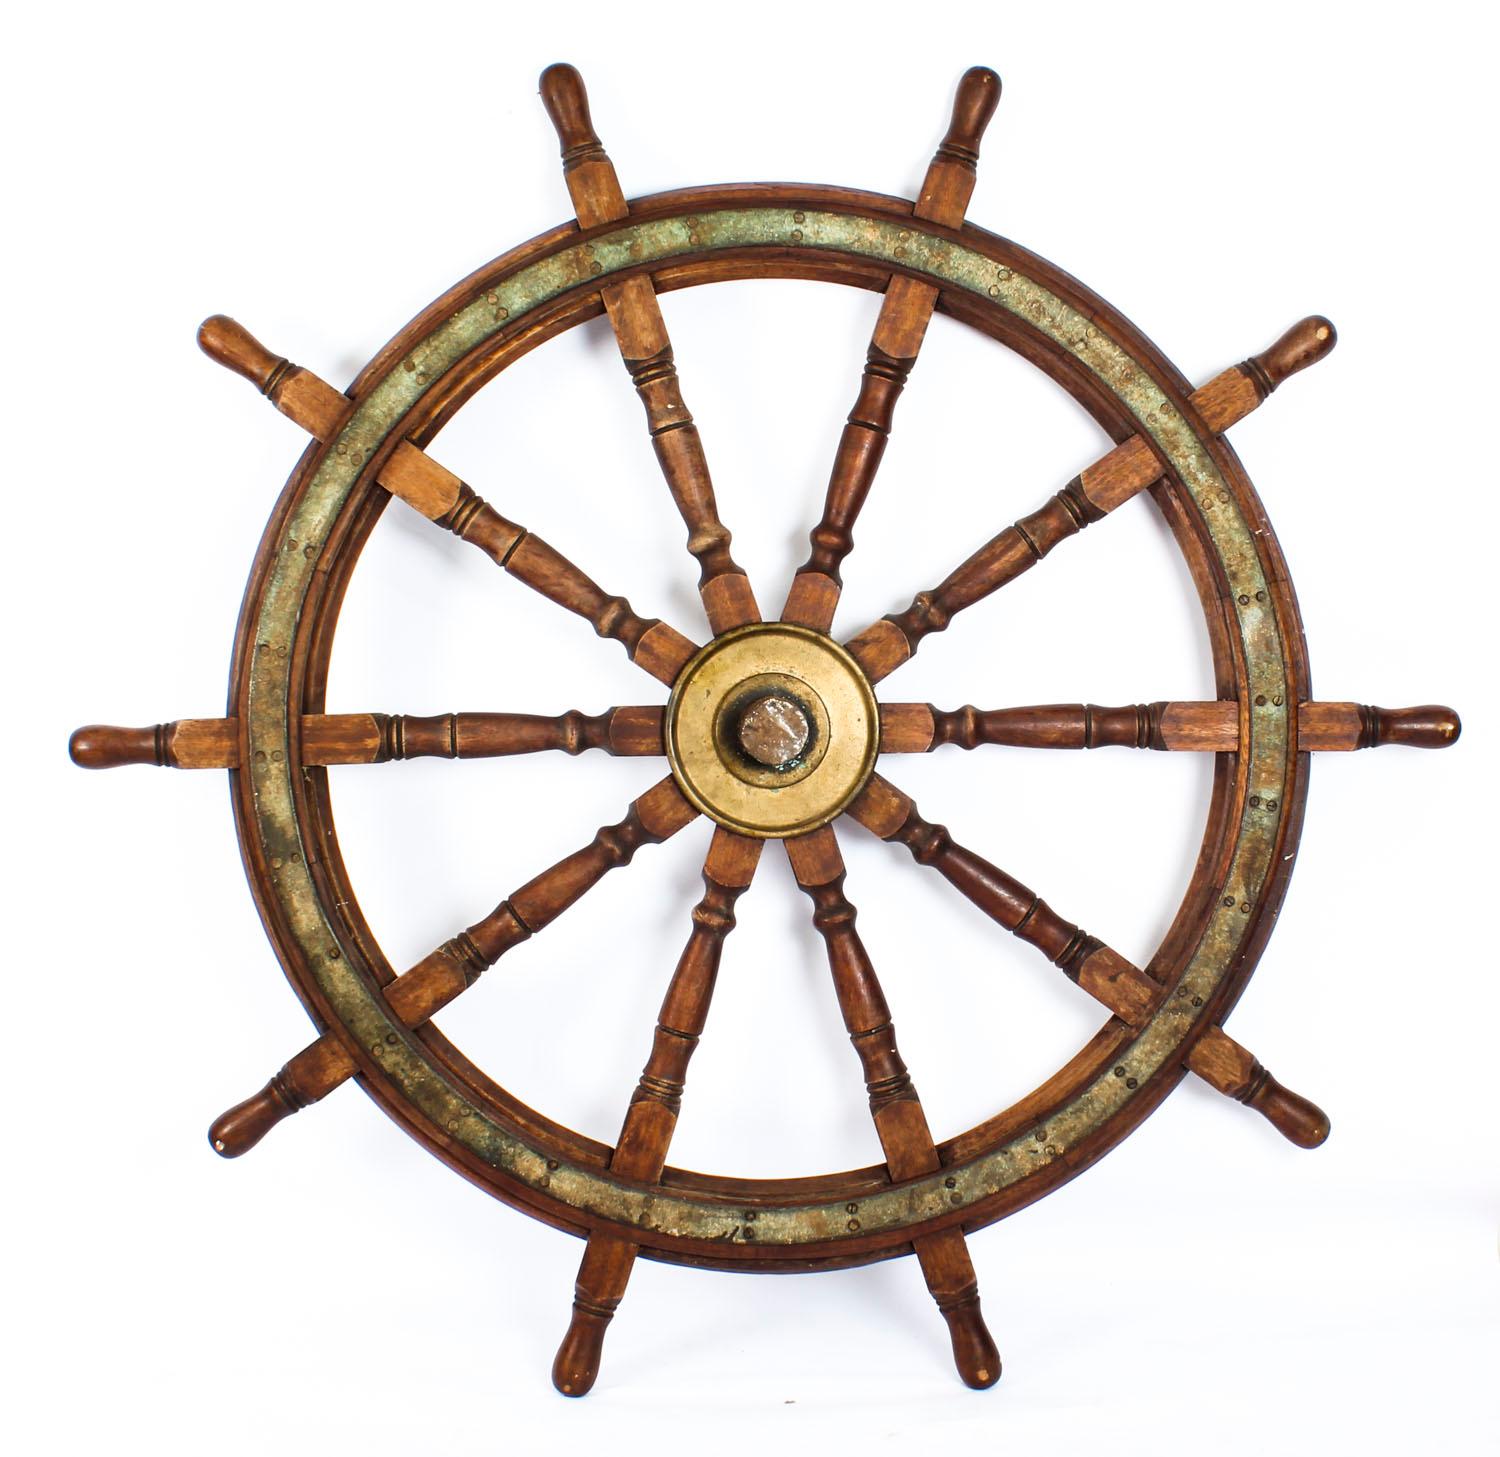 A massive Harland & Wolff ship's wheel, impressed 'Harland & Wolff, Belfast', dating from the 19th century.

The monumental 6ft 3